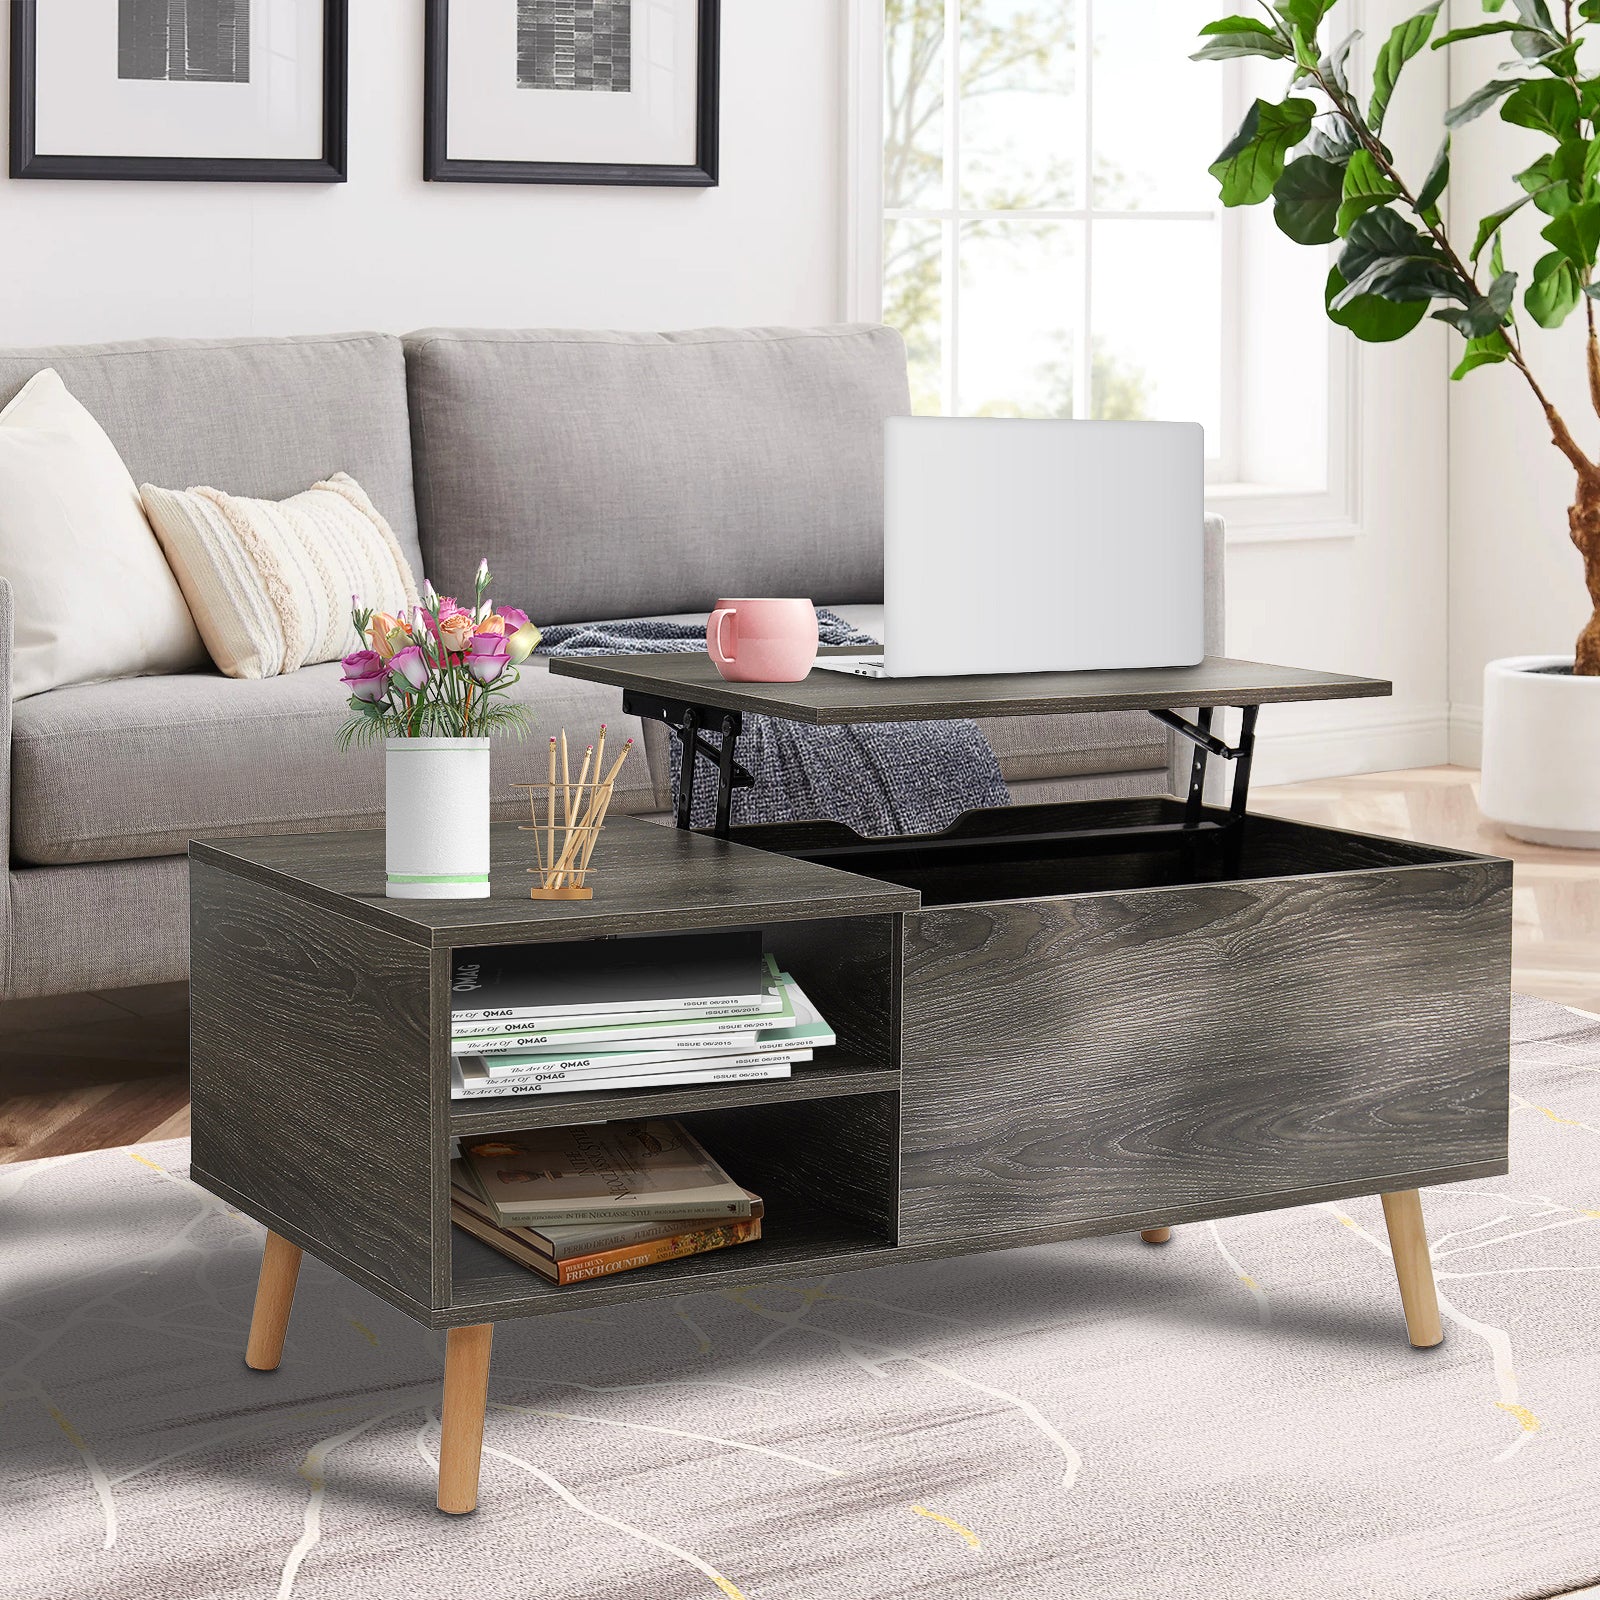 Hommpa Lift Top Coffee Table with Hidden Storage and Side Drawer Charging Station for Home Living Room